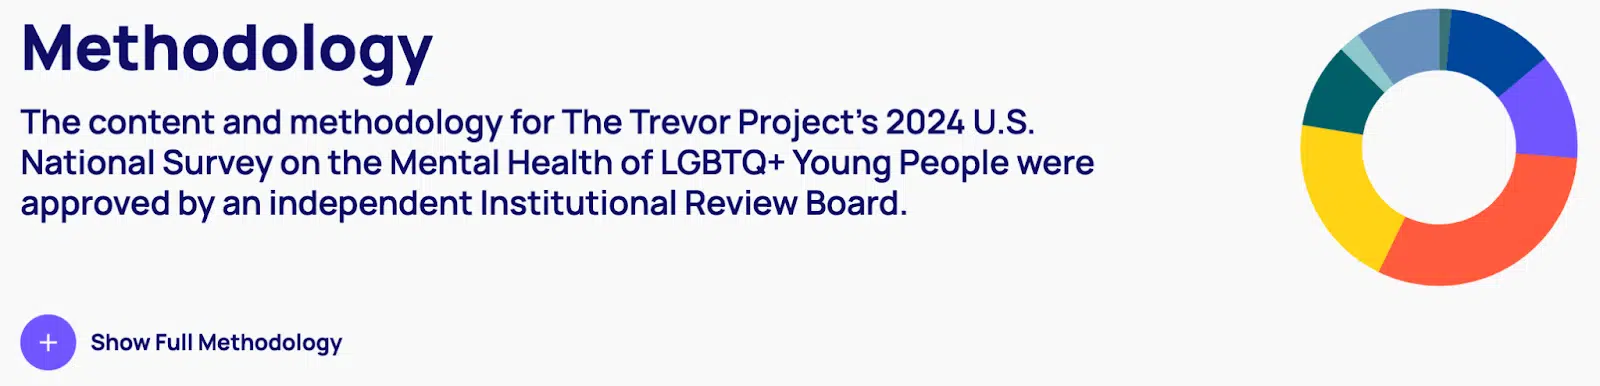 The Trevor Project: 2024 U.S. National Survey on the Mental Health of LGBTQ+ Young People